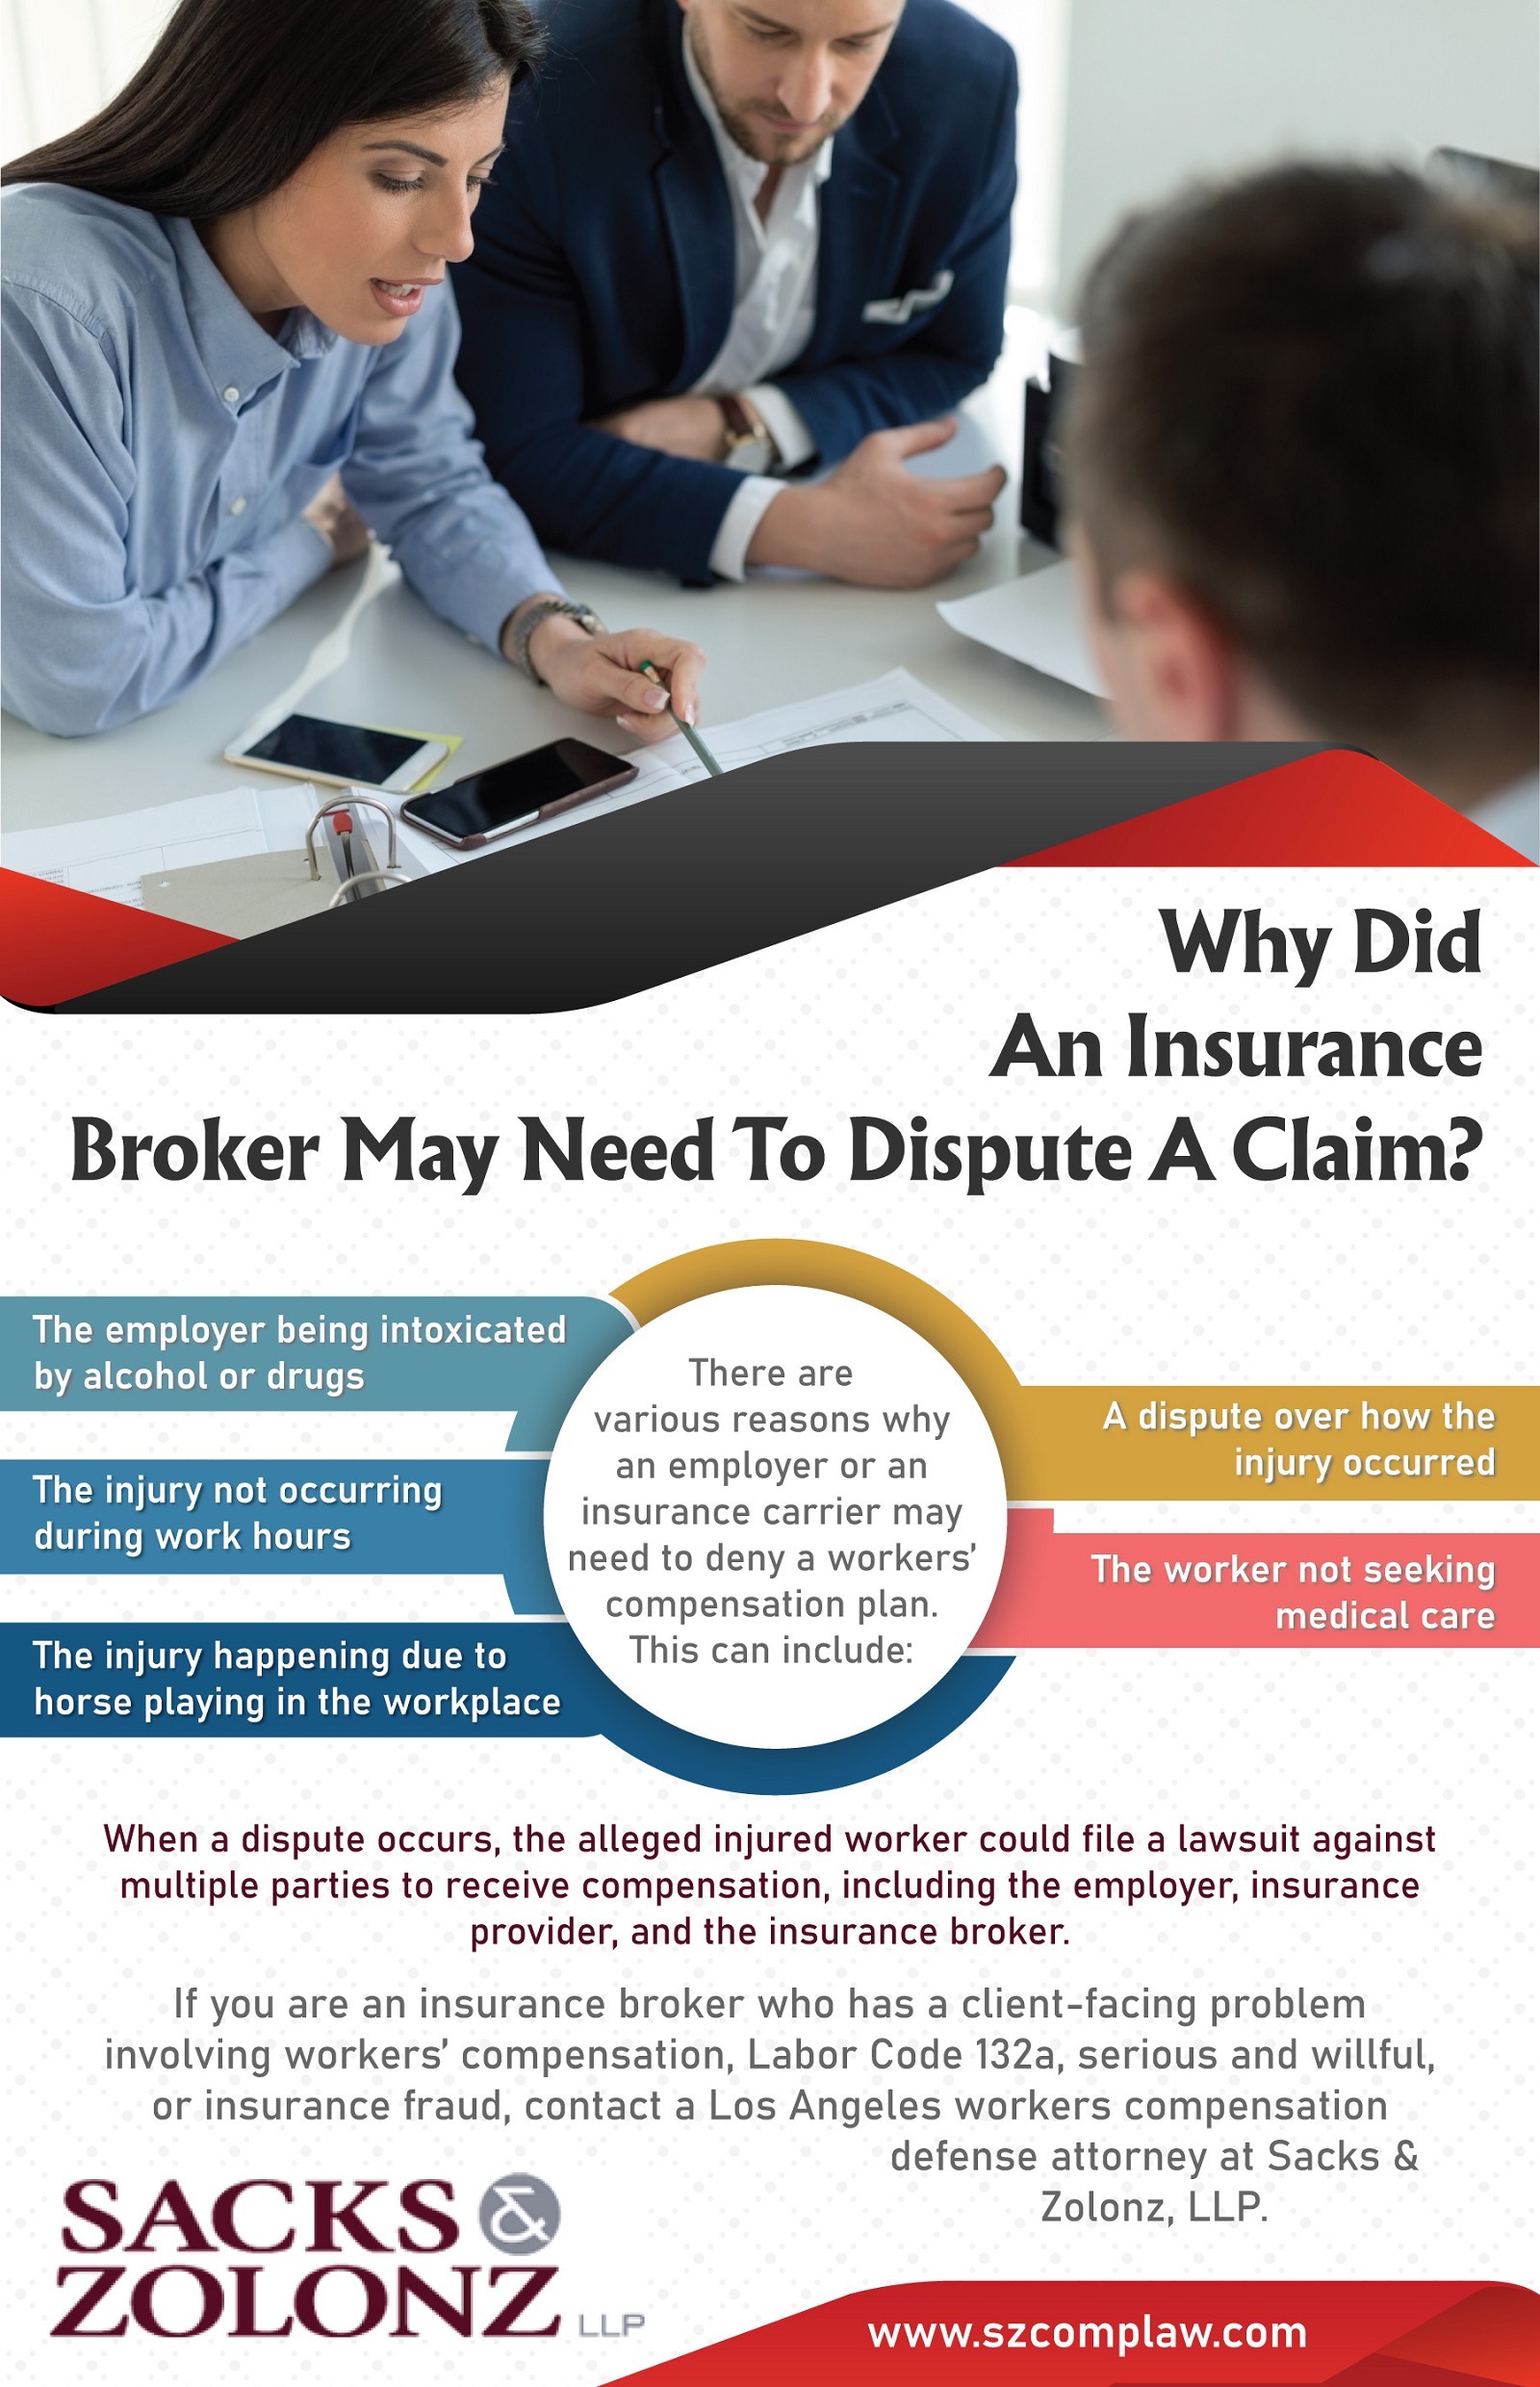 Why Did An Insurance Broker May Need To Dispute A Claim?